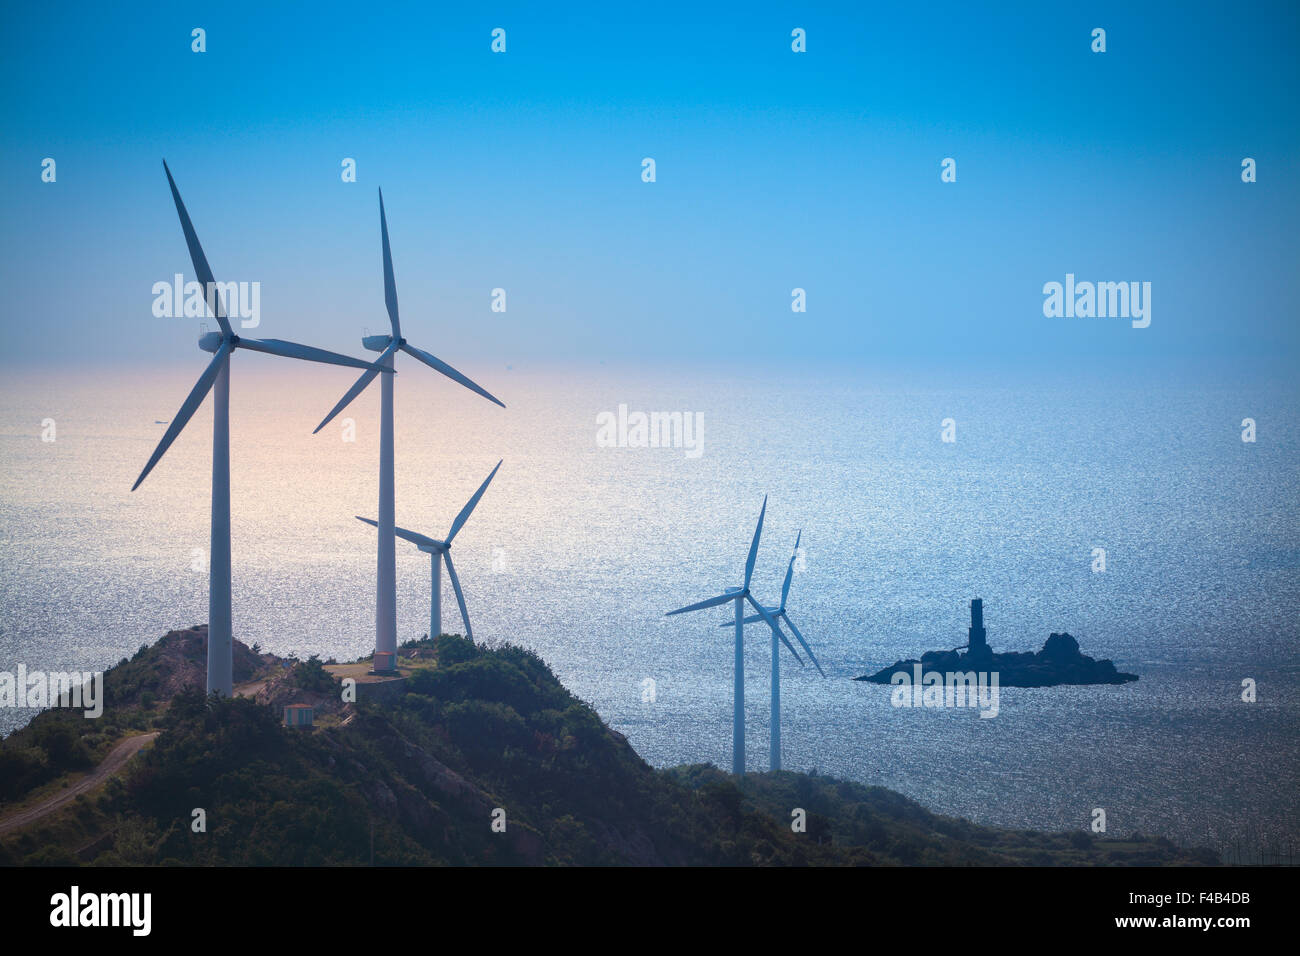 wind turbines generating electricity at the beach Stock Photo